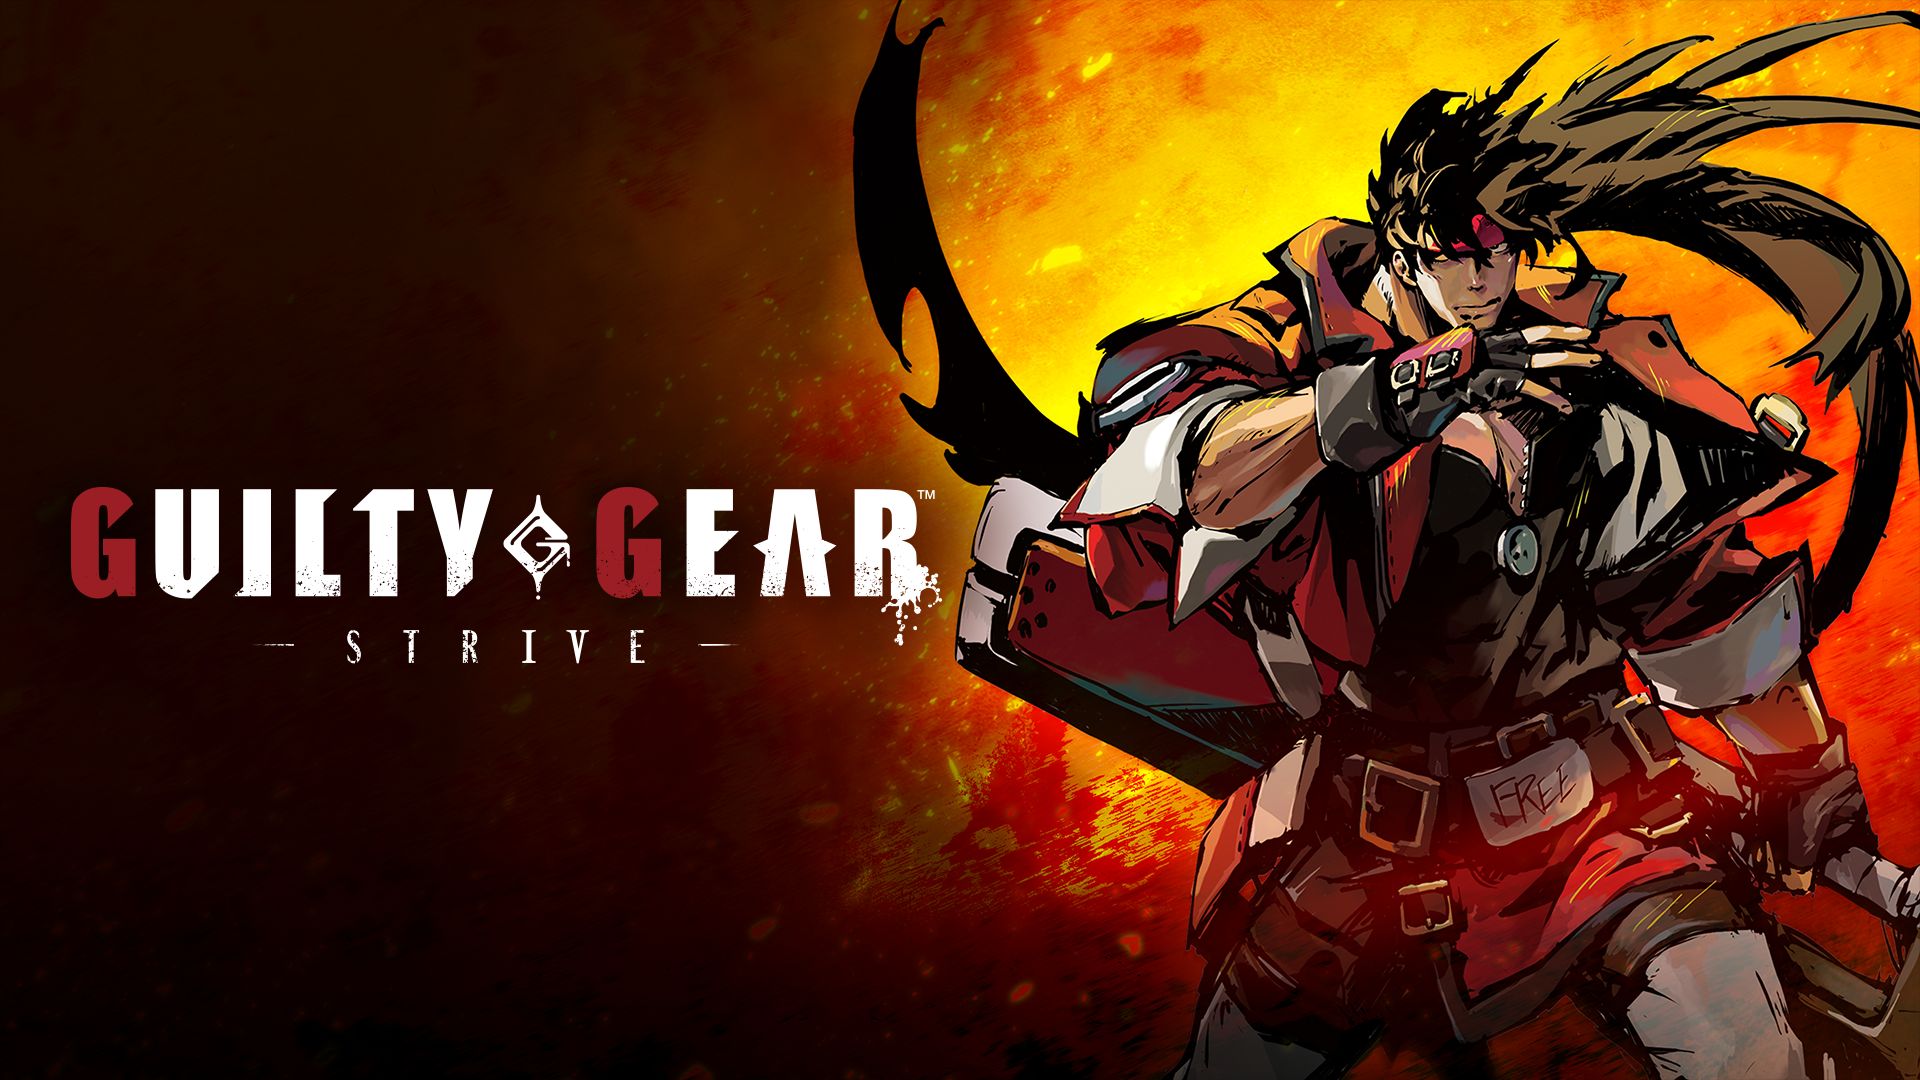 Coming to Xbox Game Pass: Guilty Gear -Strive-, Sid Meier's Civilization 6, Valheim, and More - Xbox Wire